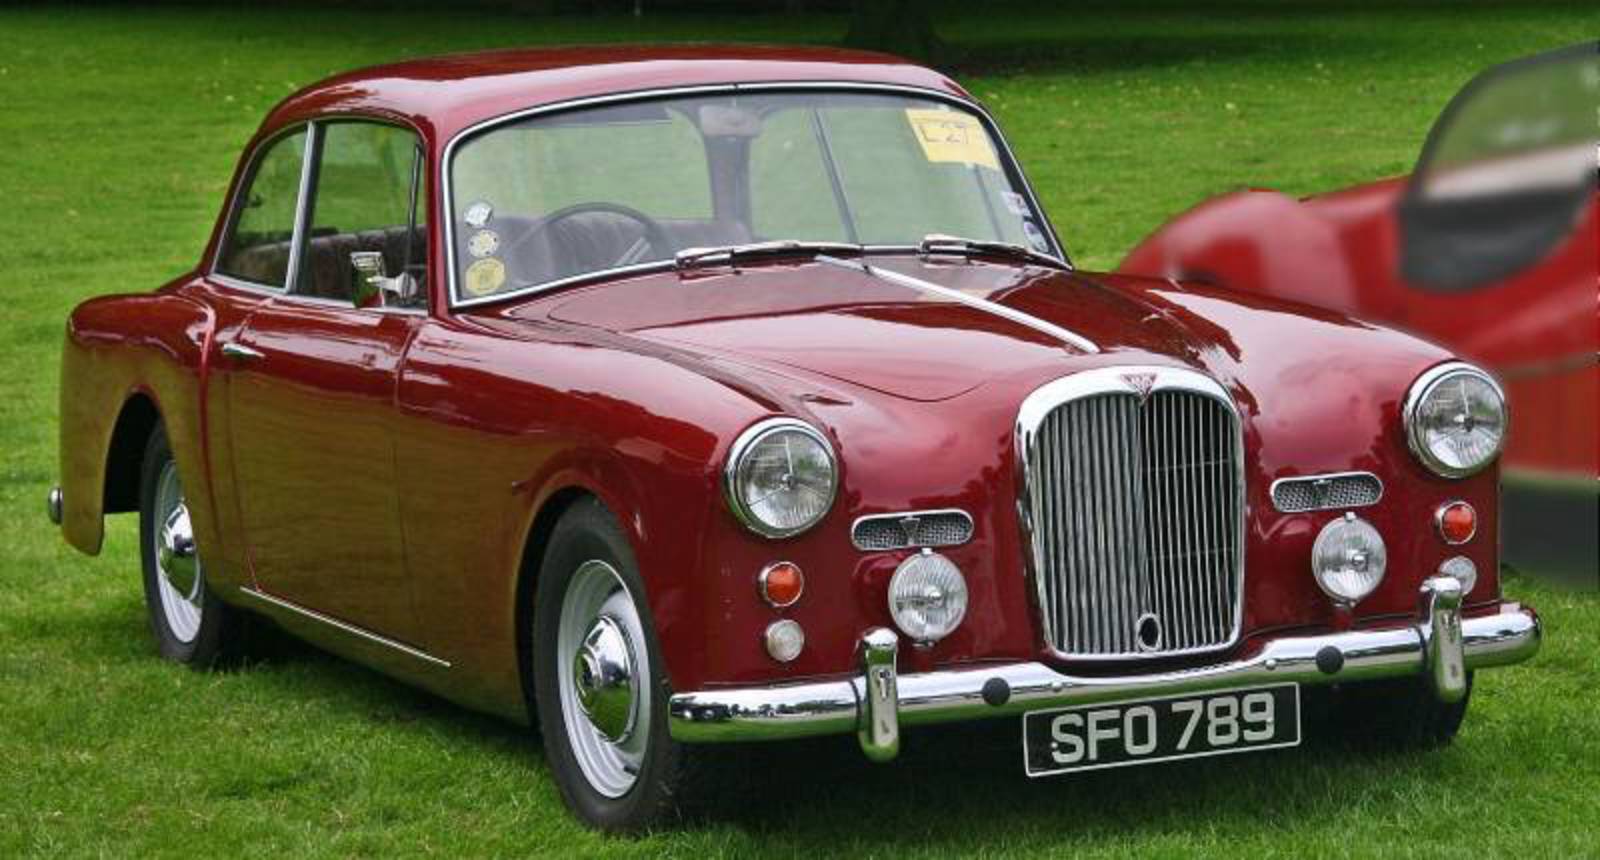 Alvis 1270 Special Sports Photo Gallery: Photo #10 out of 9, Image ...